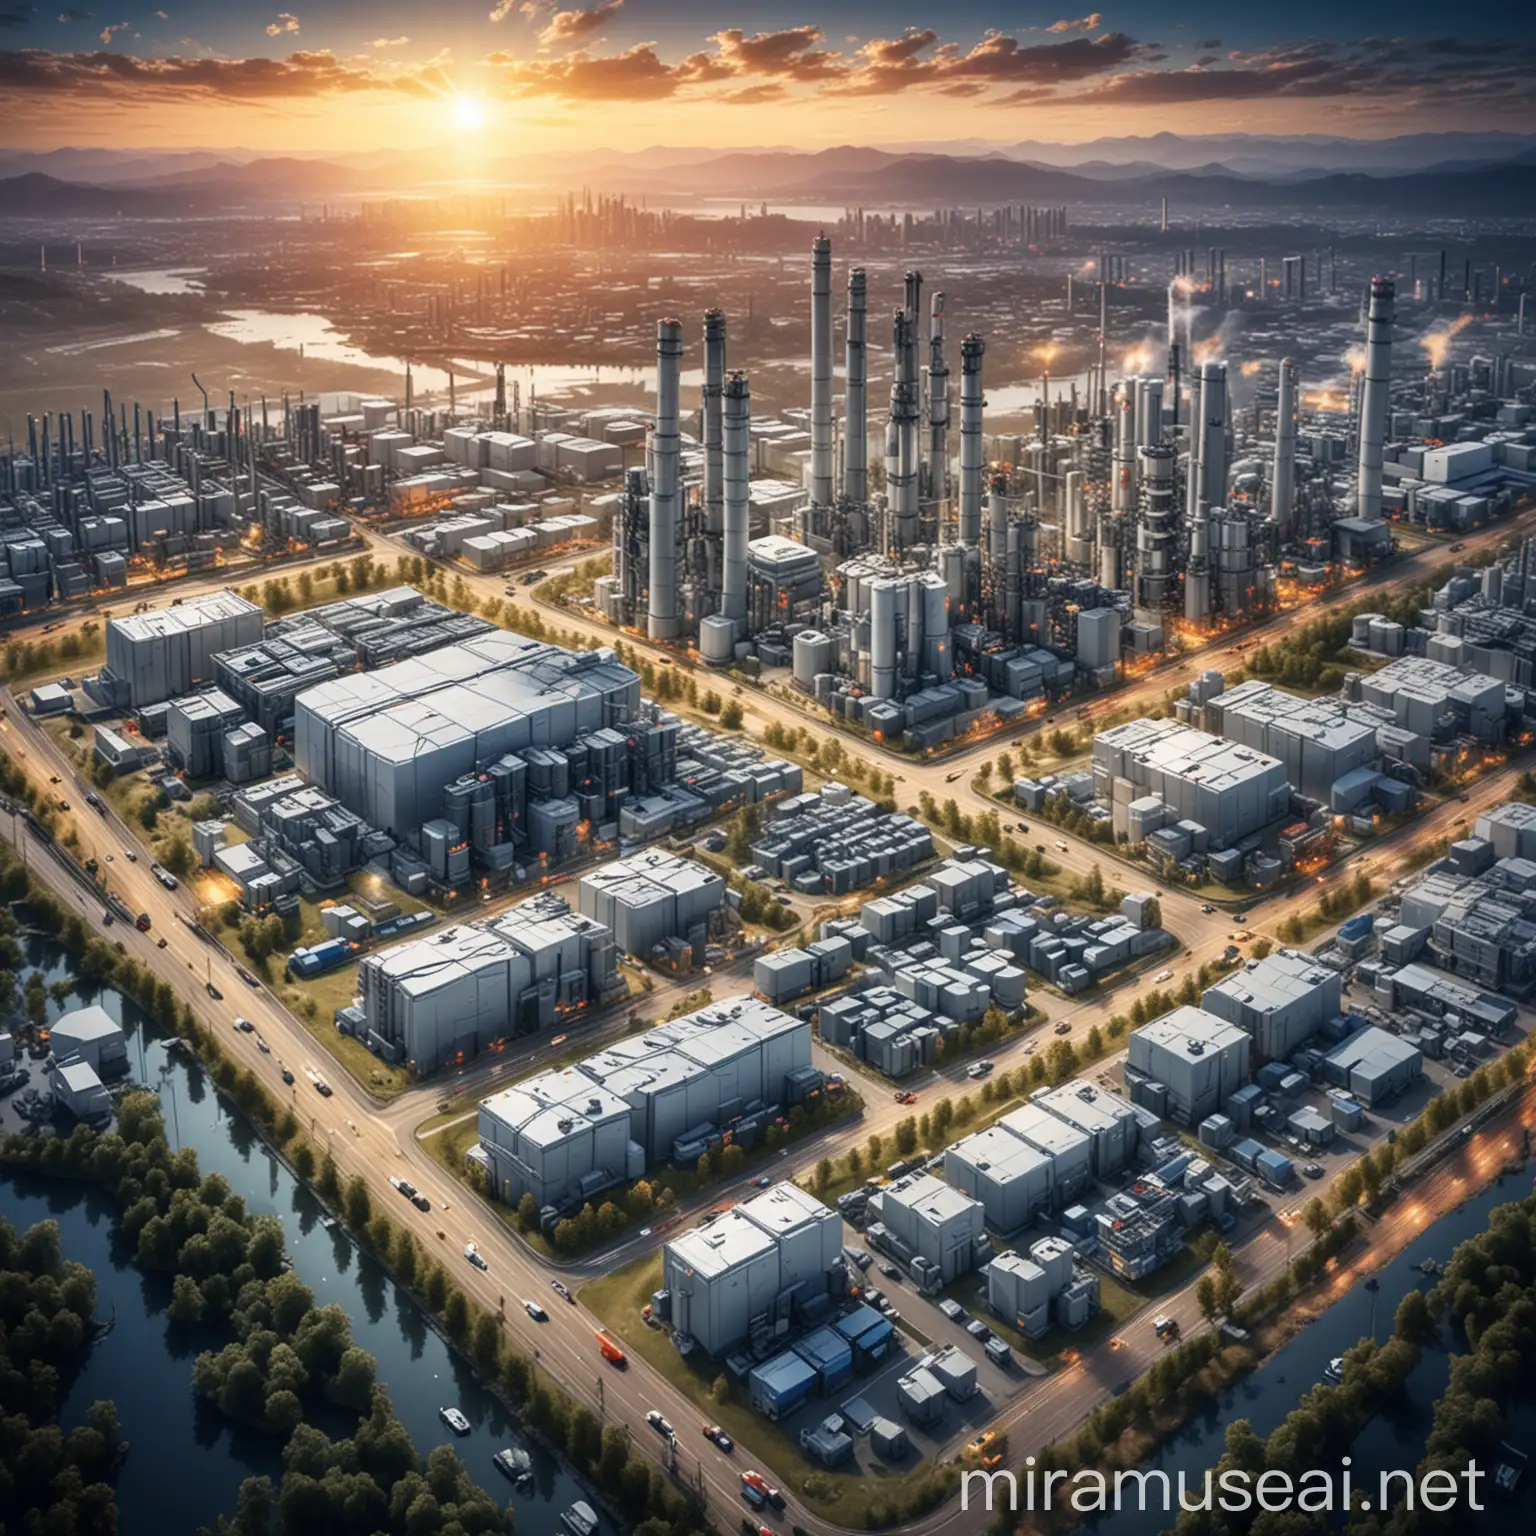 Intelligent Factory and Smart Cities with Energy Storage System